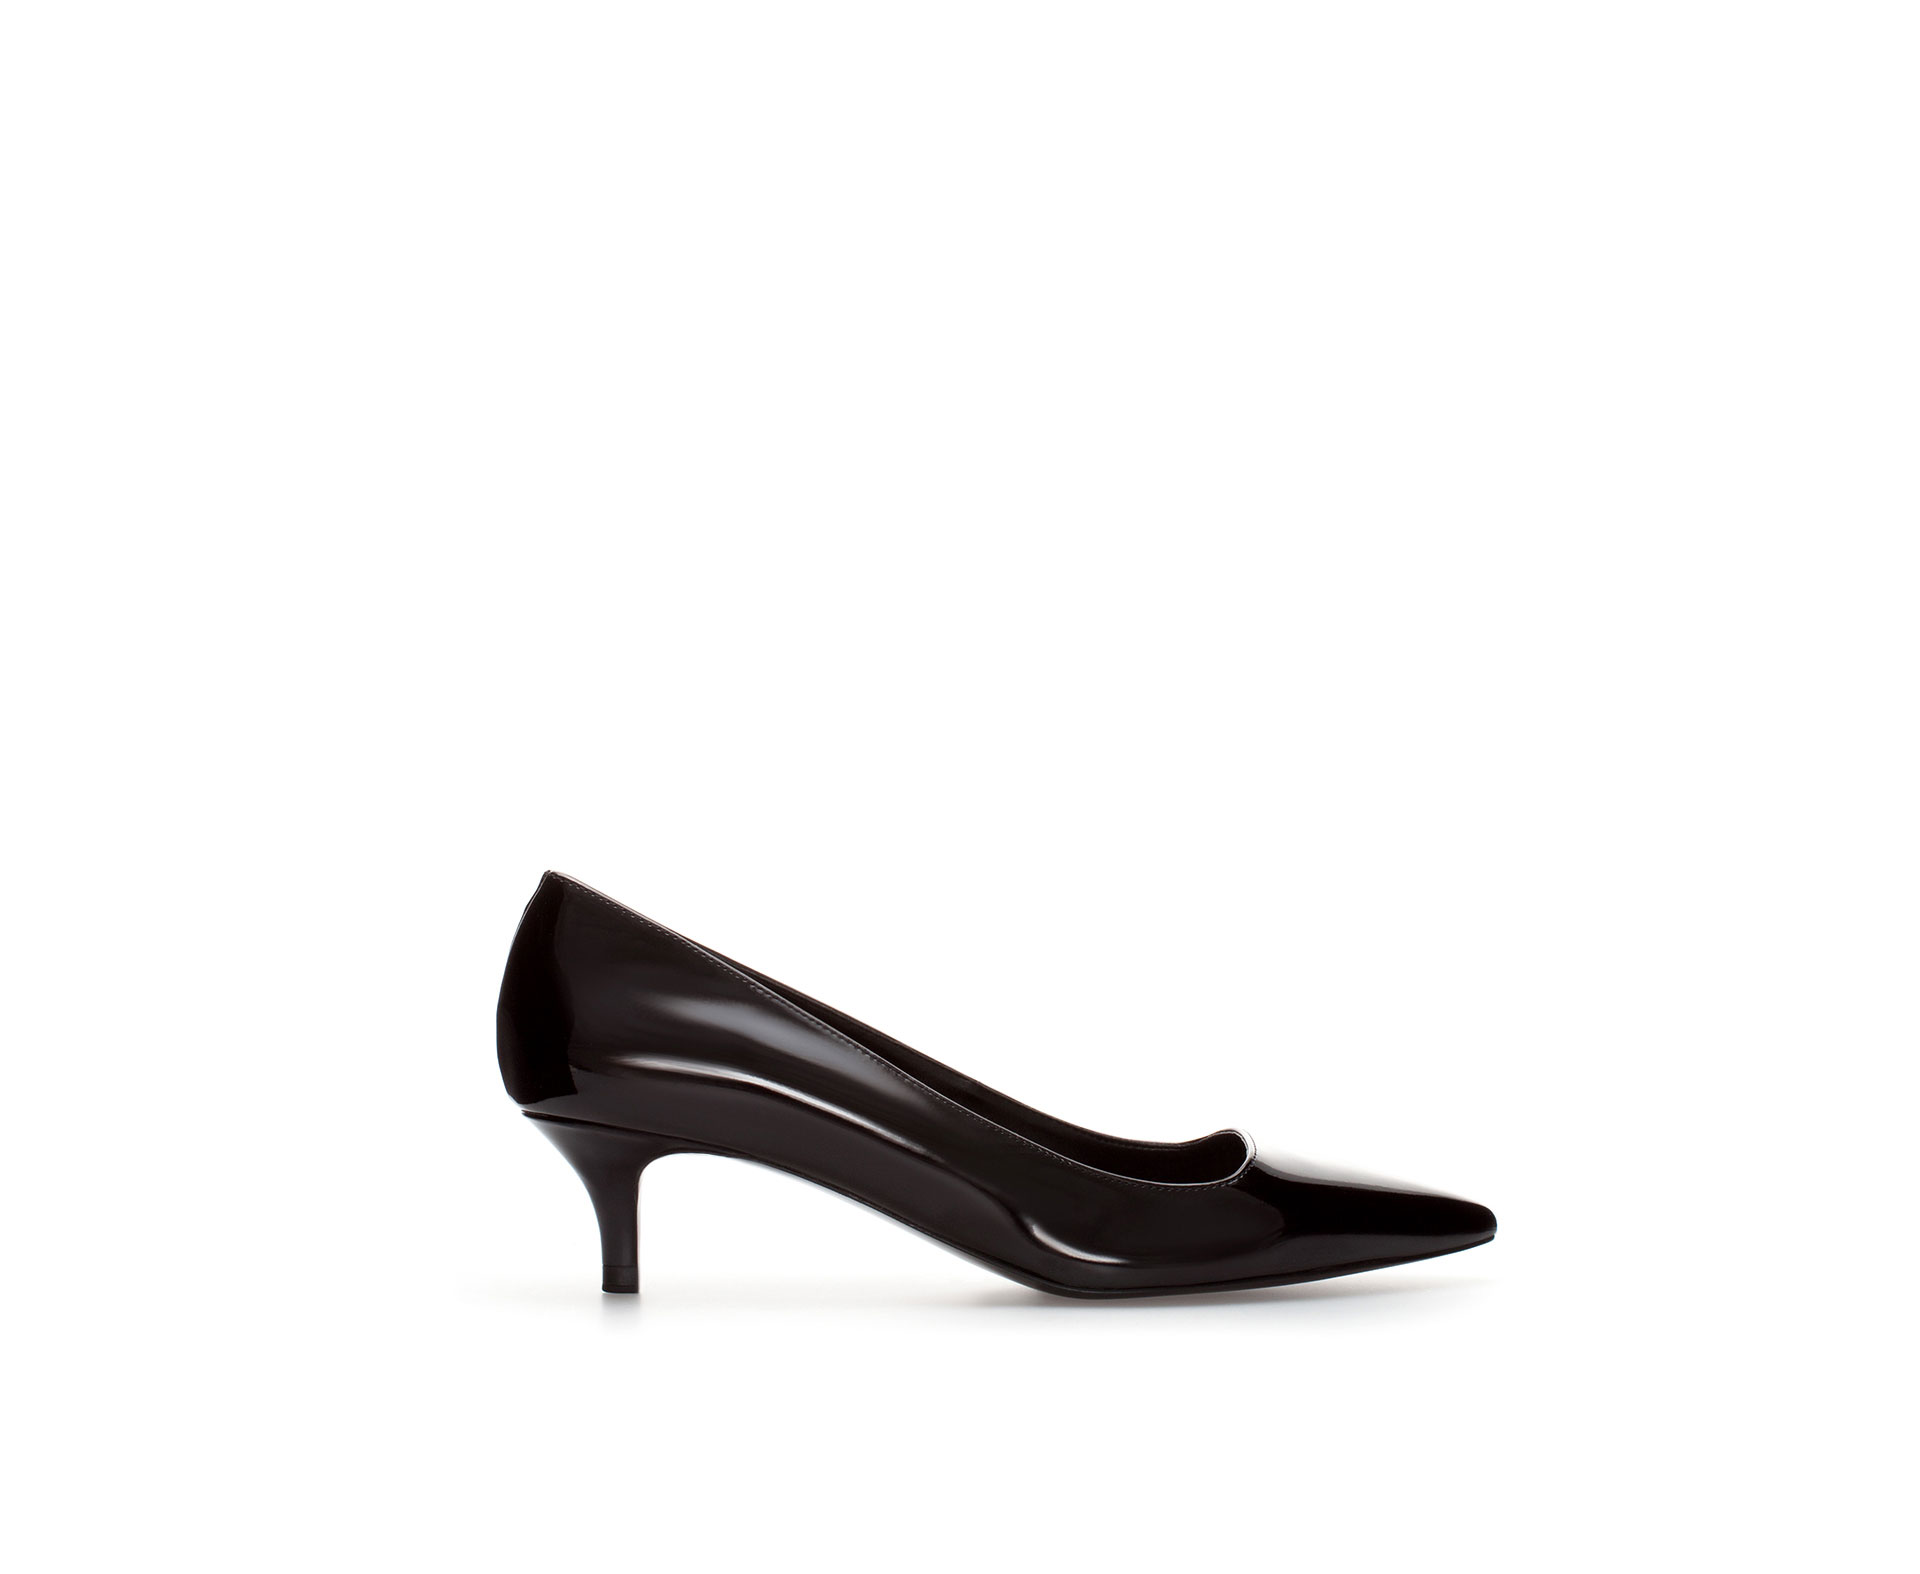 Zara Synthetic Patent Leather Court Shoe with Kitten Heel in Black | Lyst